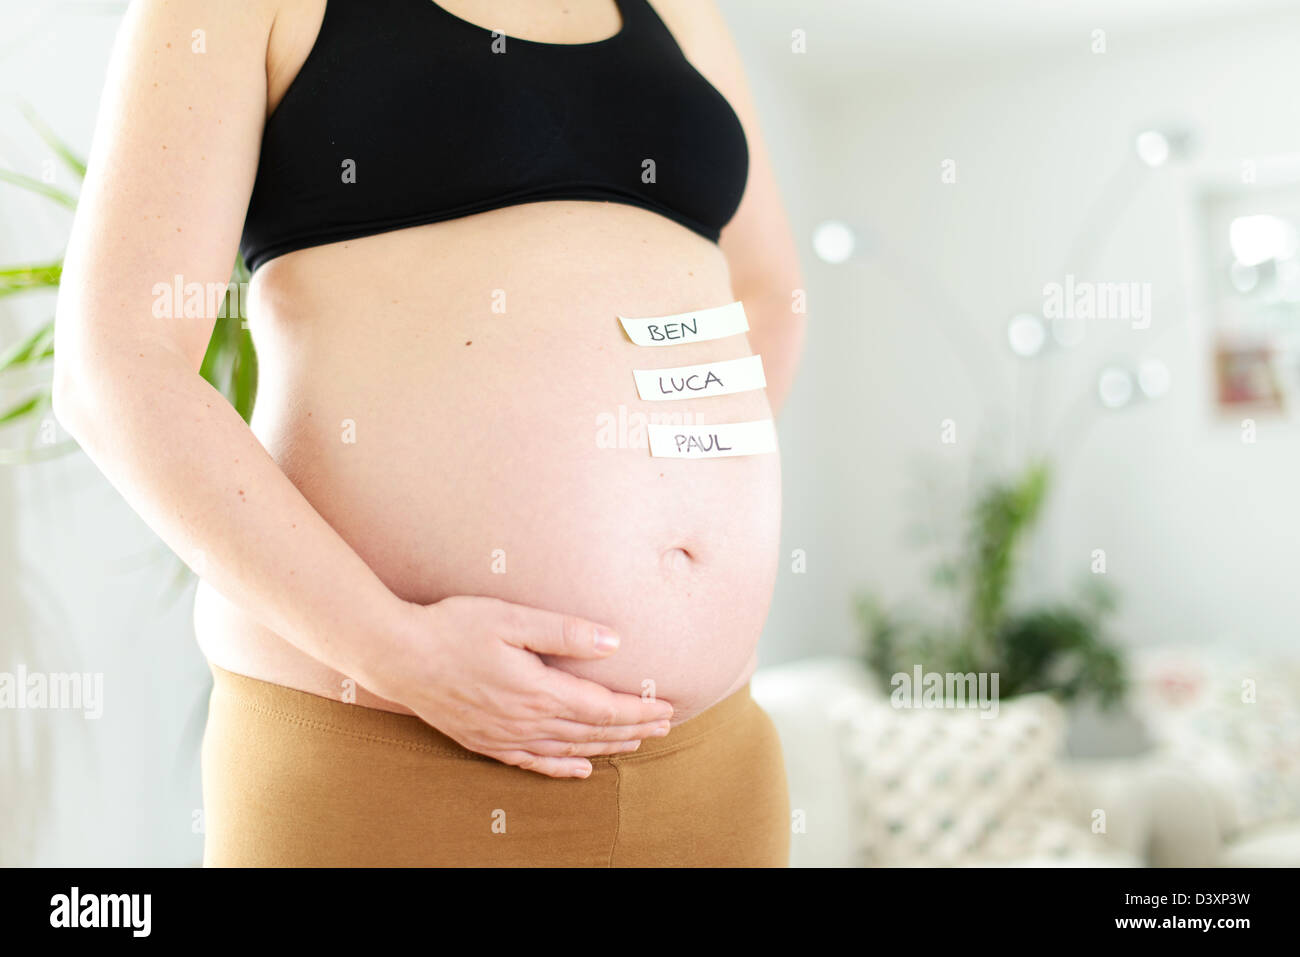 The most popular German boys' names on a baby belly of a pregnant woman. Stock Photo